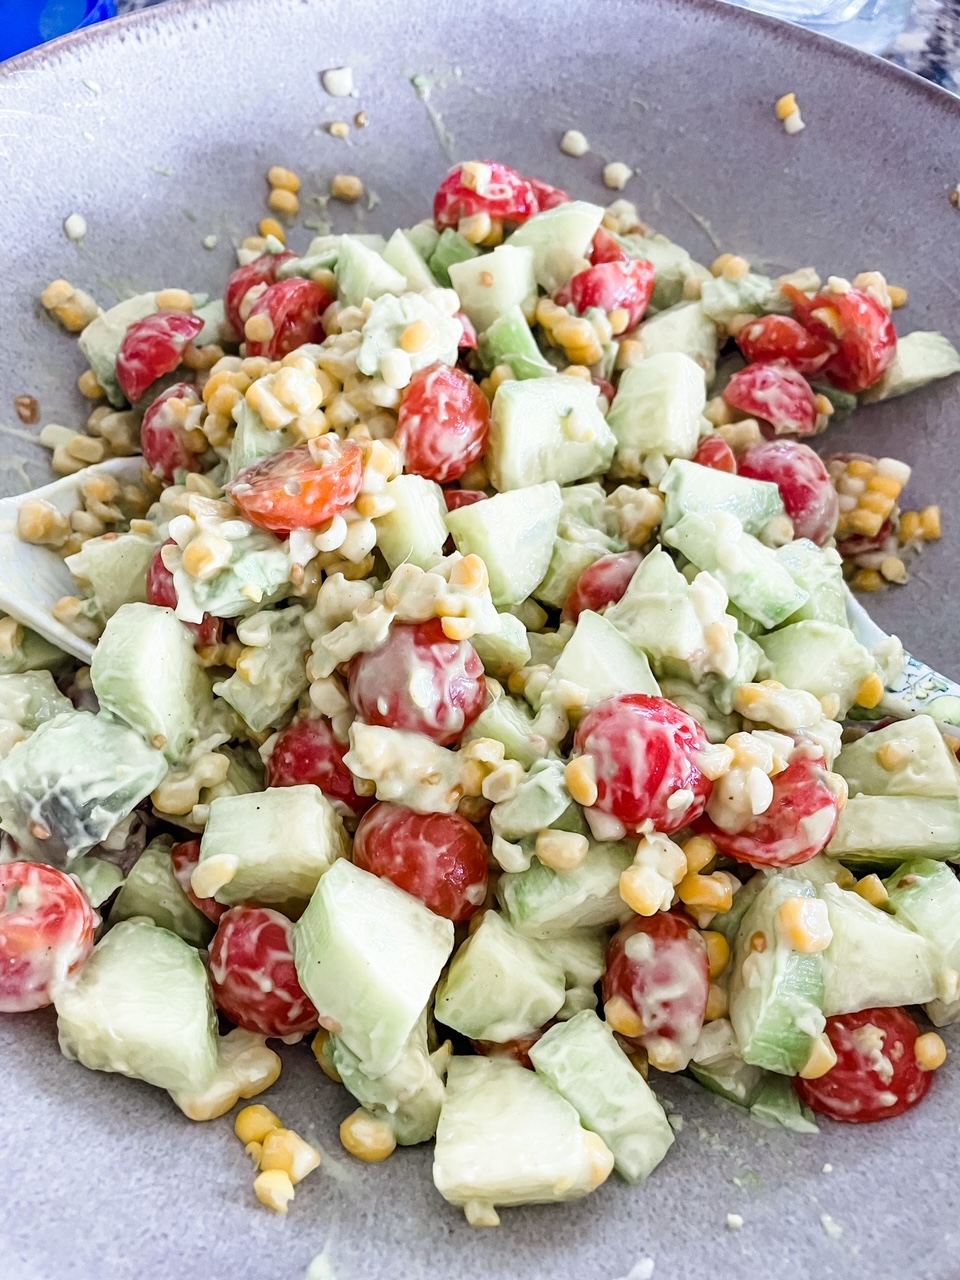 The finished and dressed Cucumber, Corn and Tomato Salad with Easy Avocado Dressing